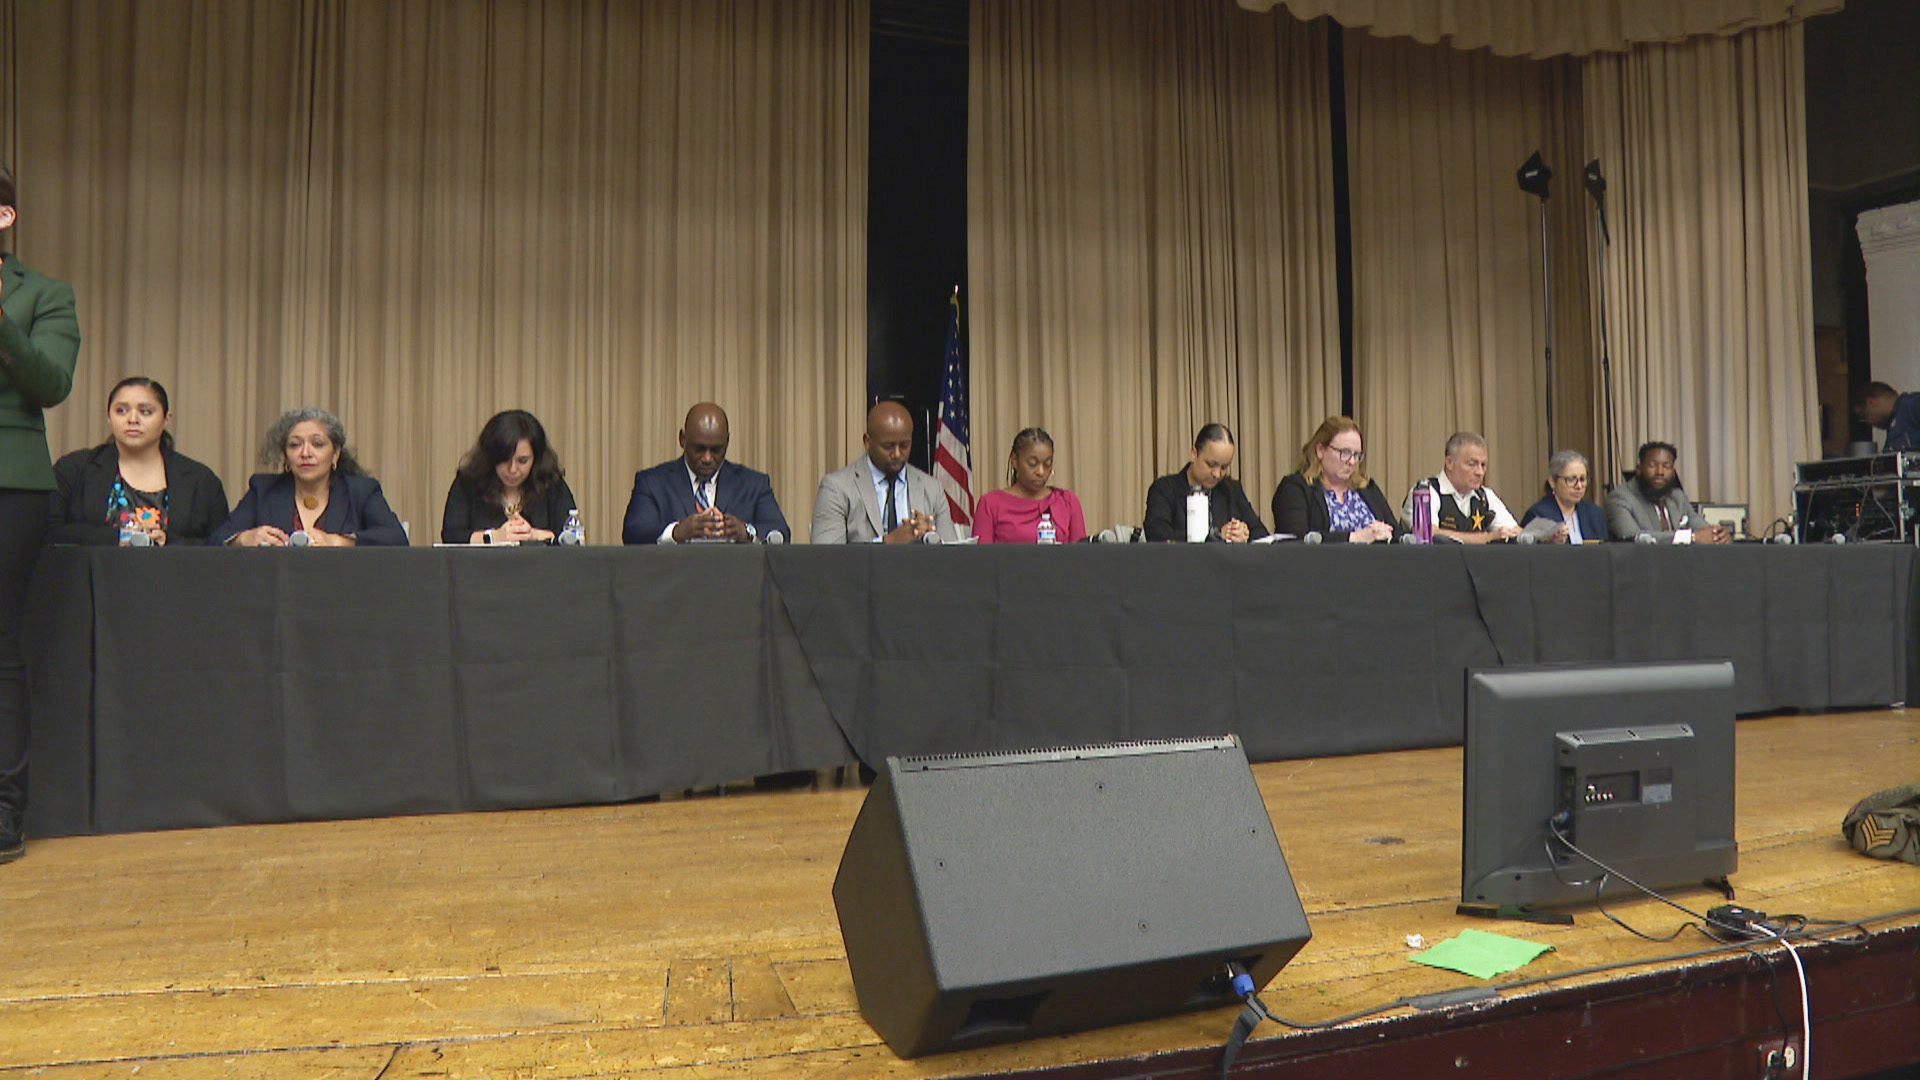 At Heated Community Meeting, Officials Detail Plan to Transform Vacant ...